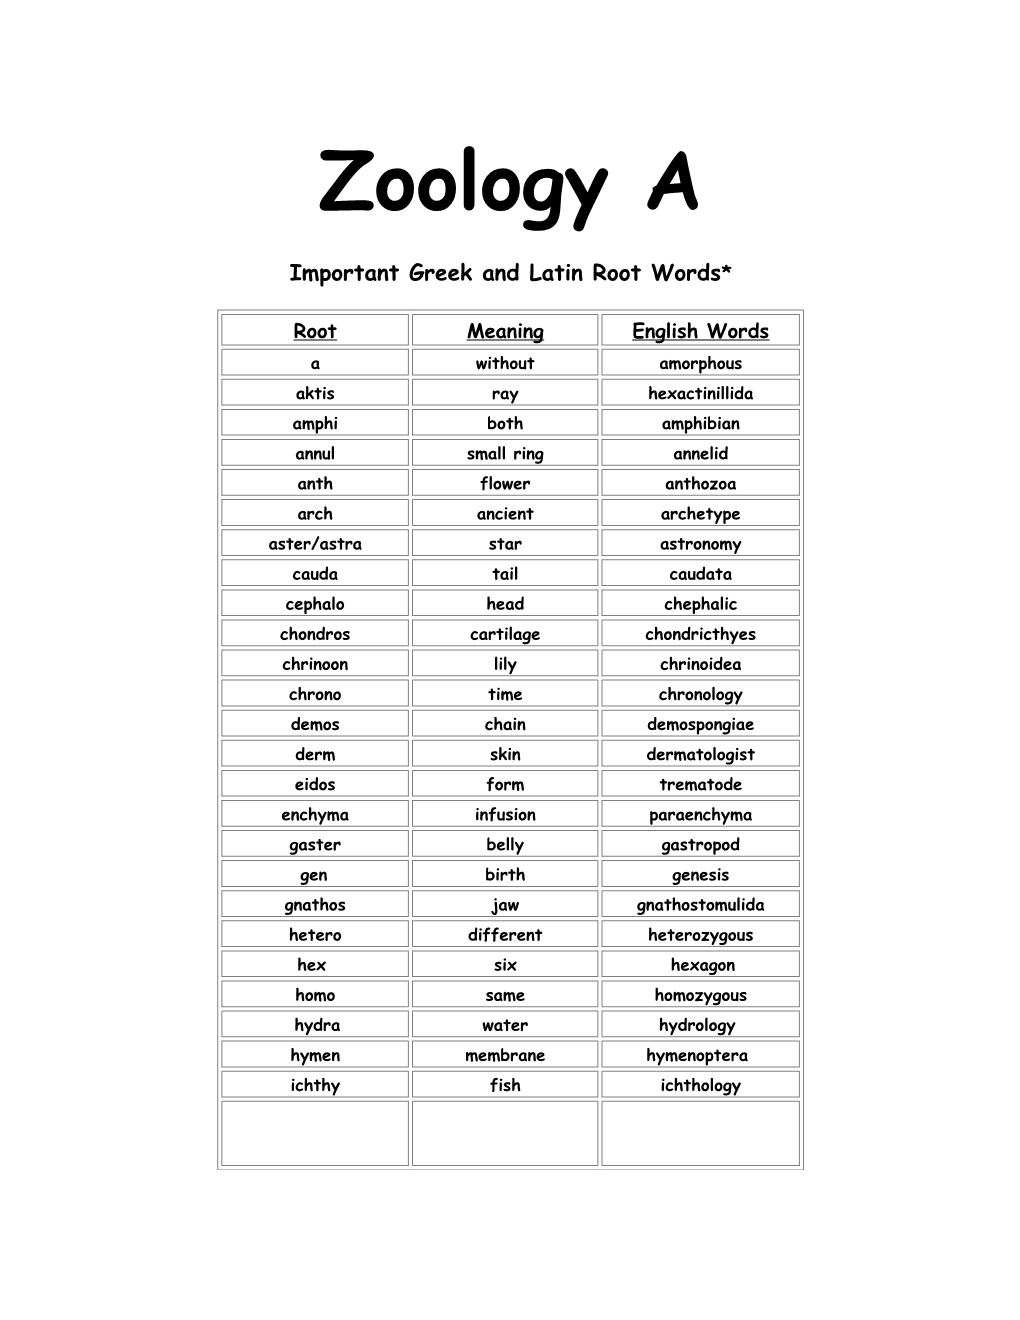 Greek and Latin Root Words*